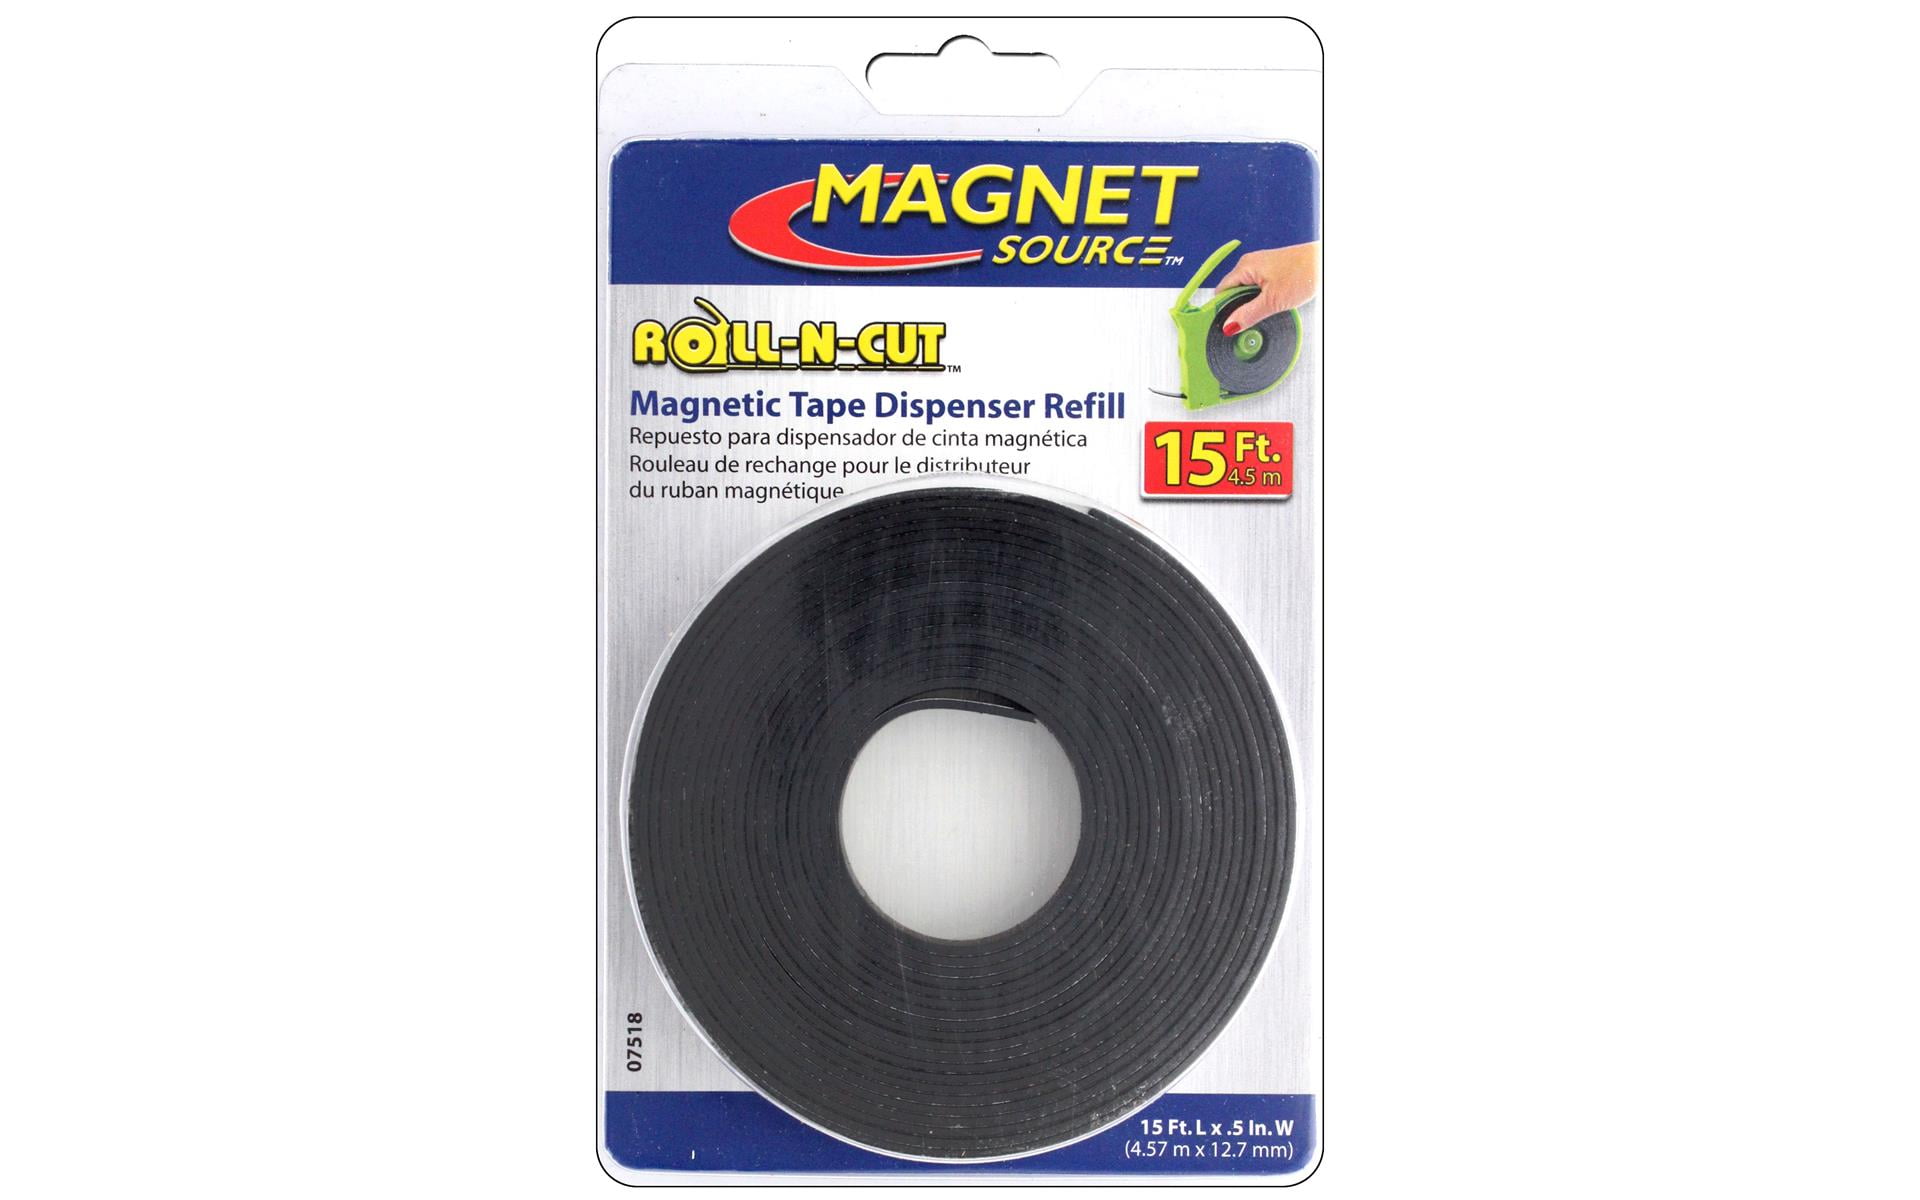 Magnetic Tape A+B - 3.3 Feet x 0.6 Inches x 0.07 Inches - Self Adhesive Magnetic Tape Roll with A Ruler